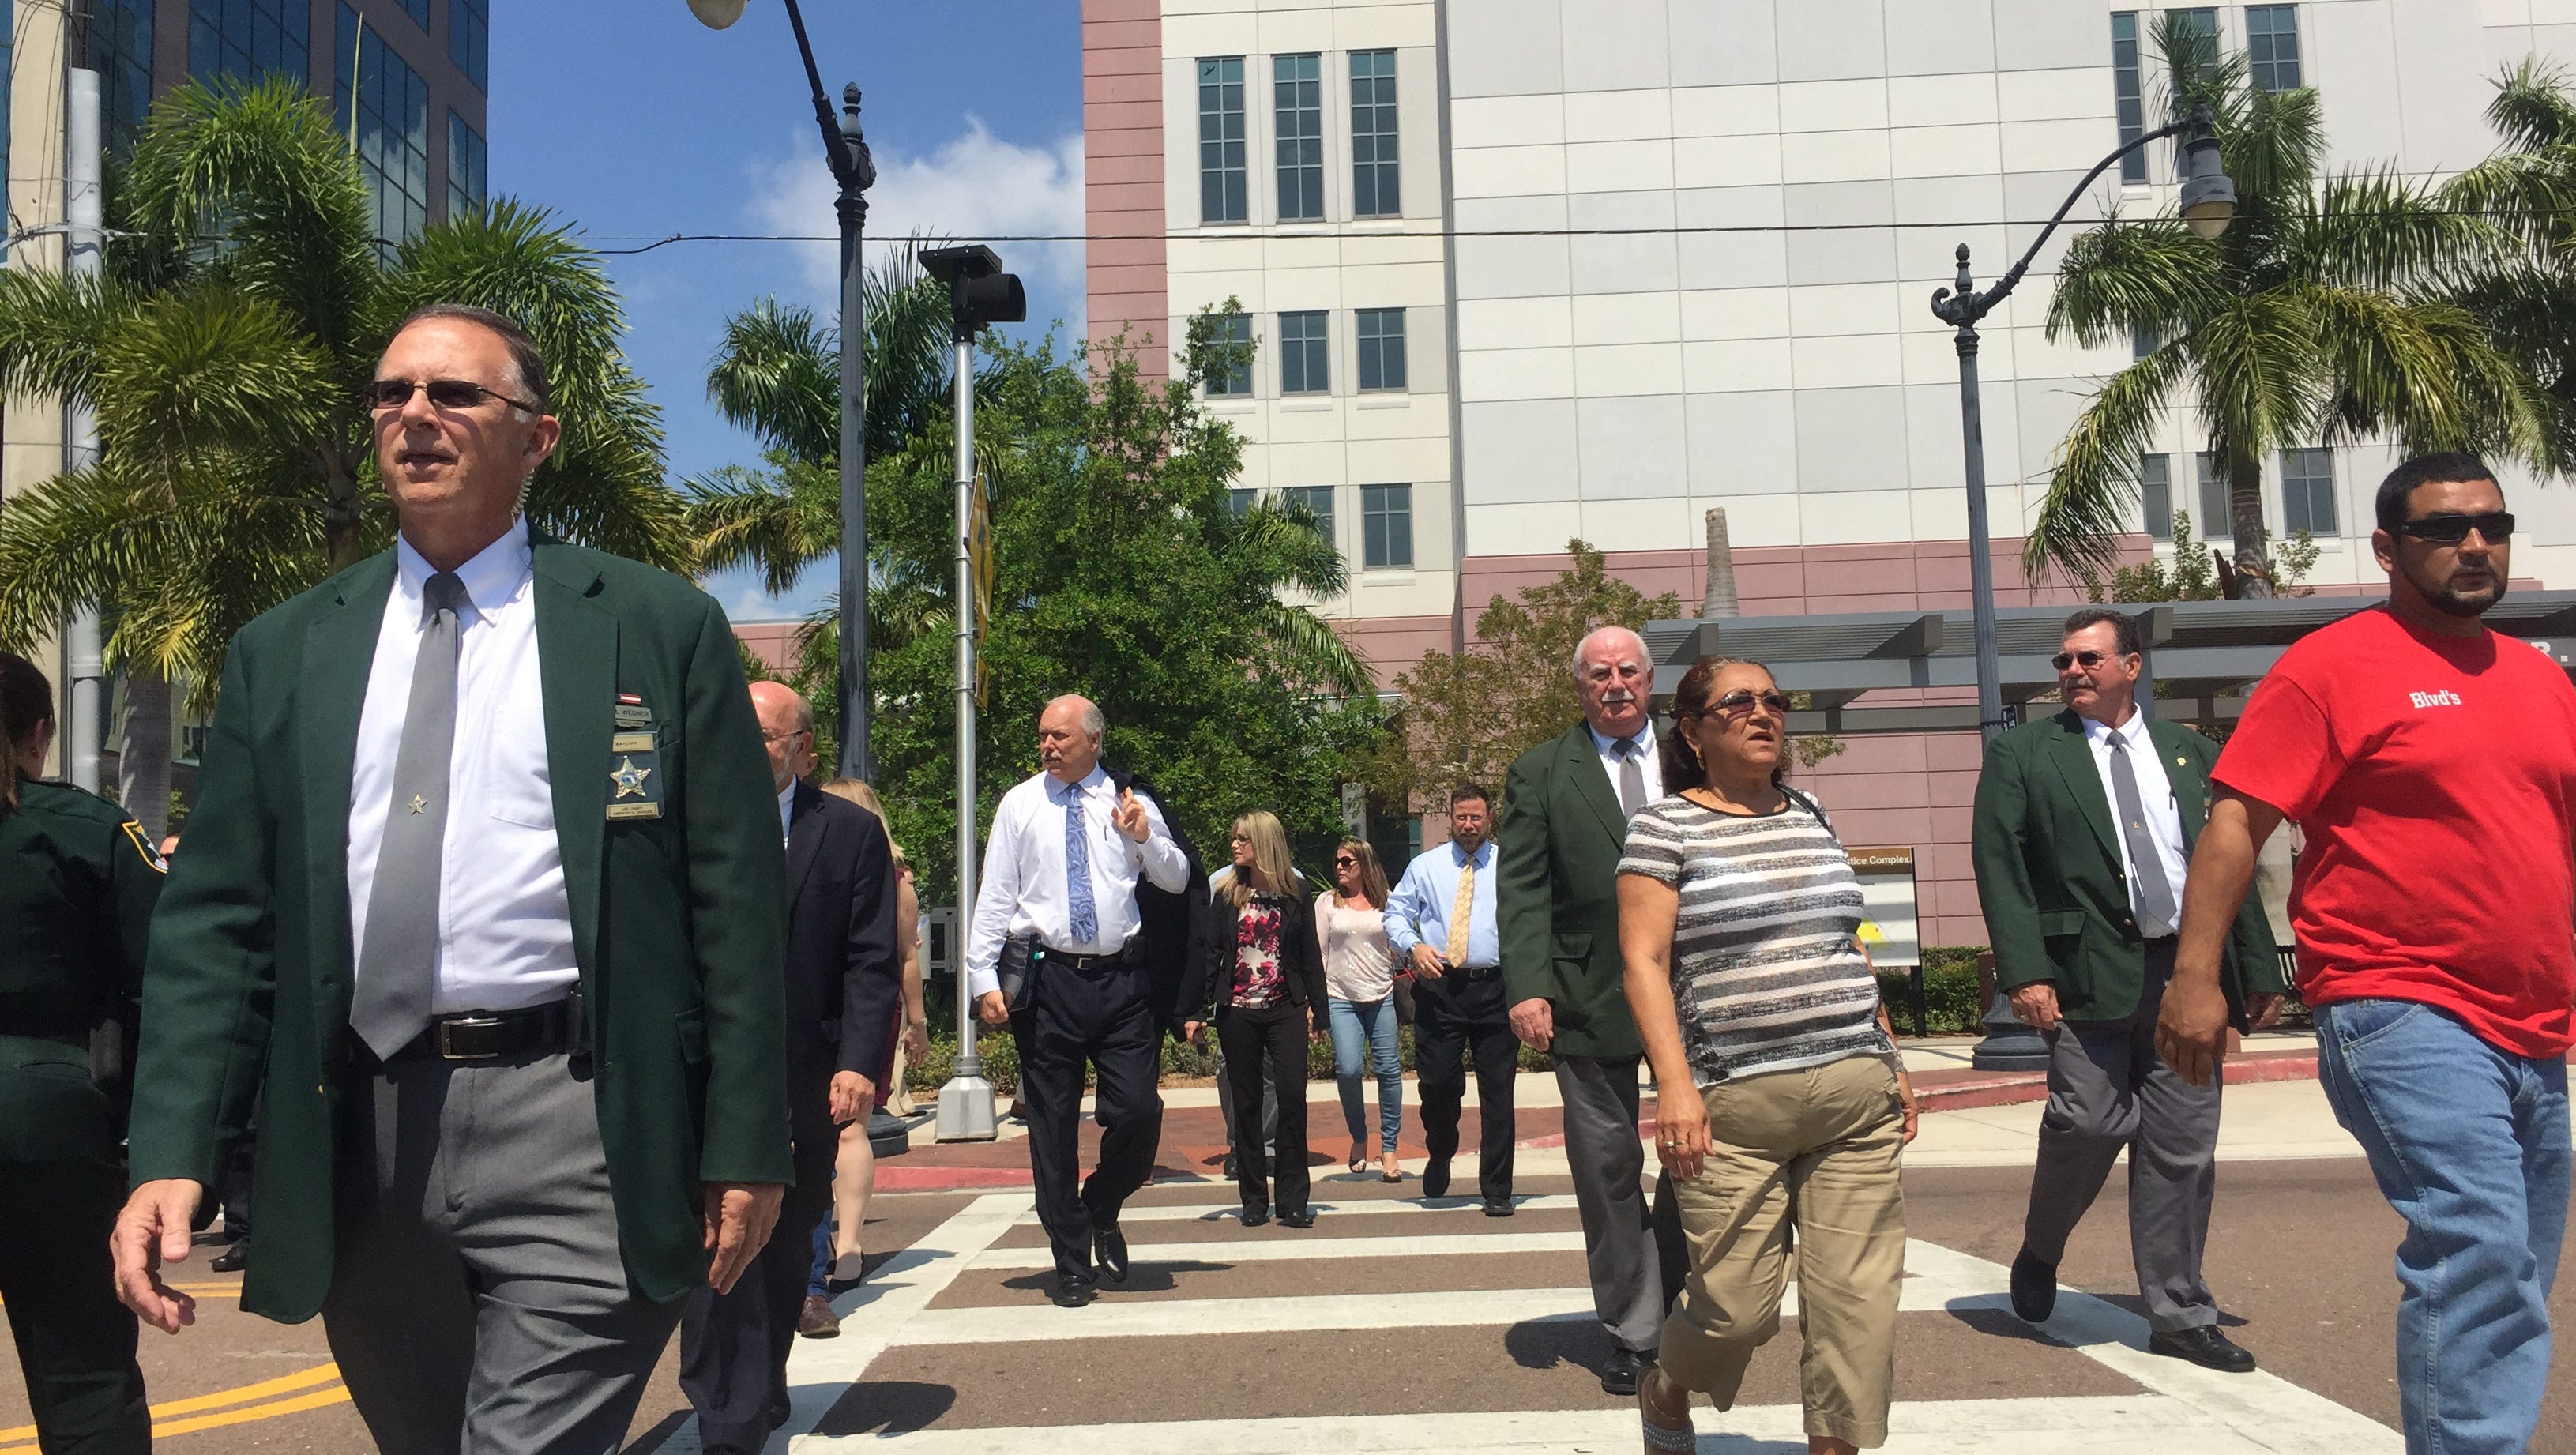 All clear given at Justice Center after evacuation